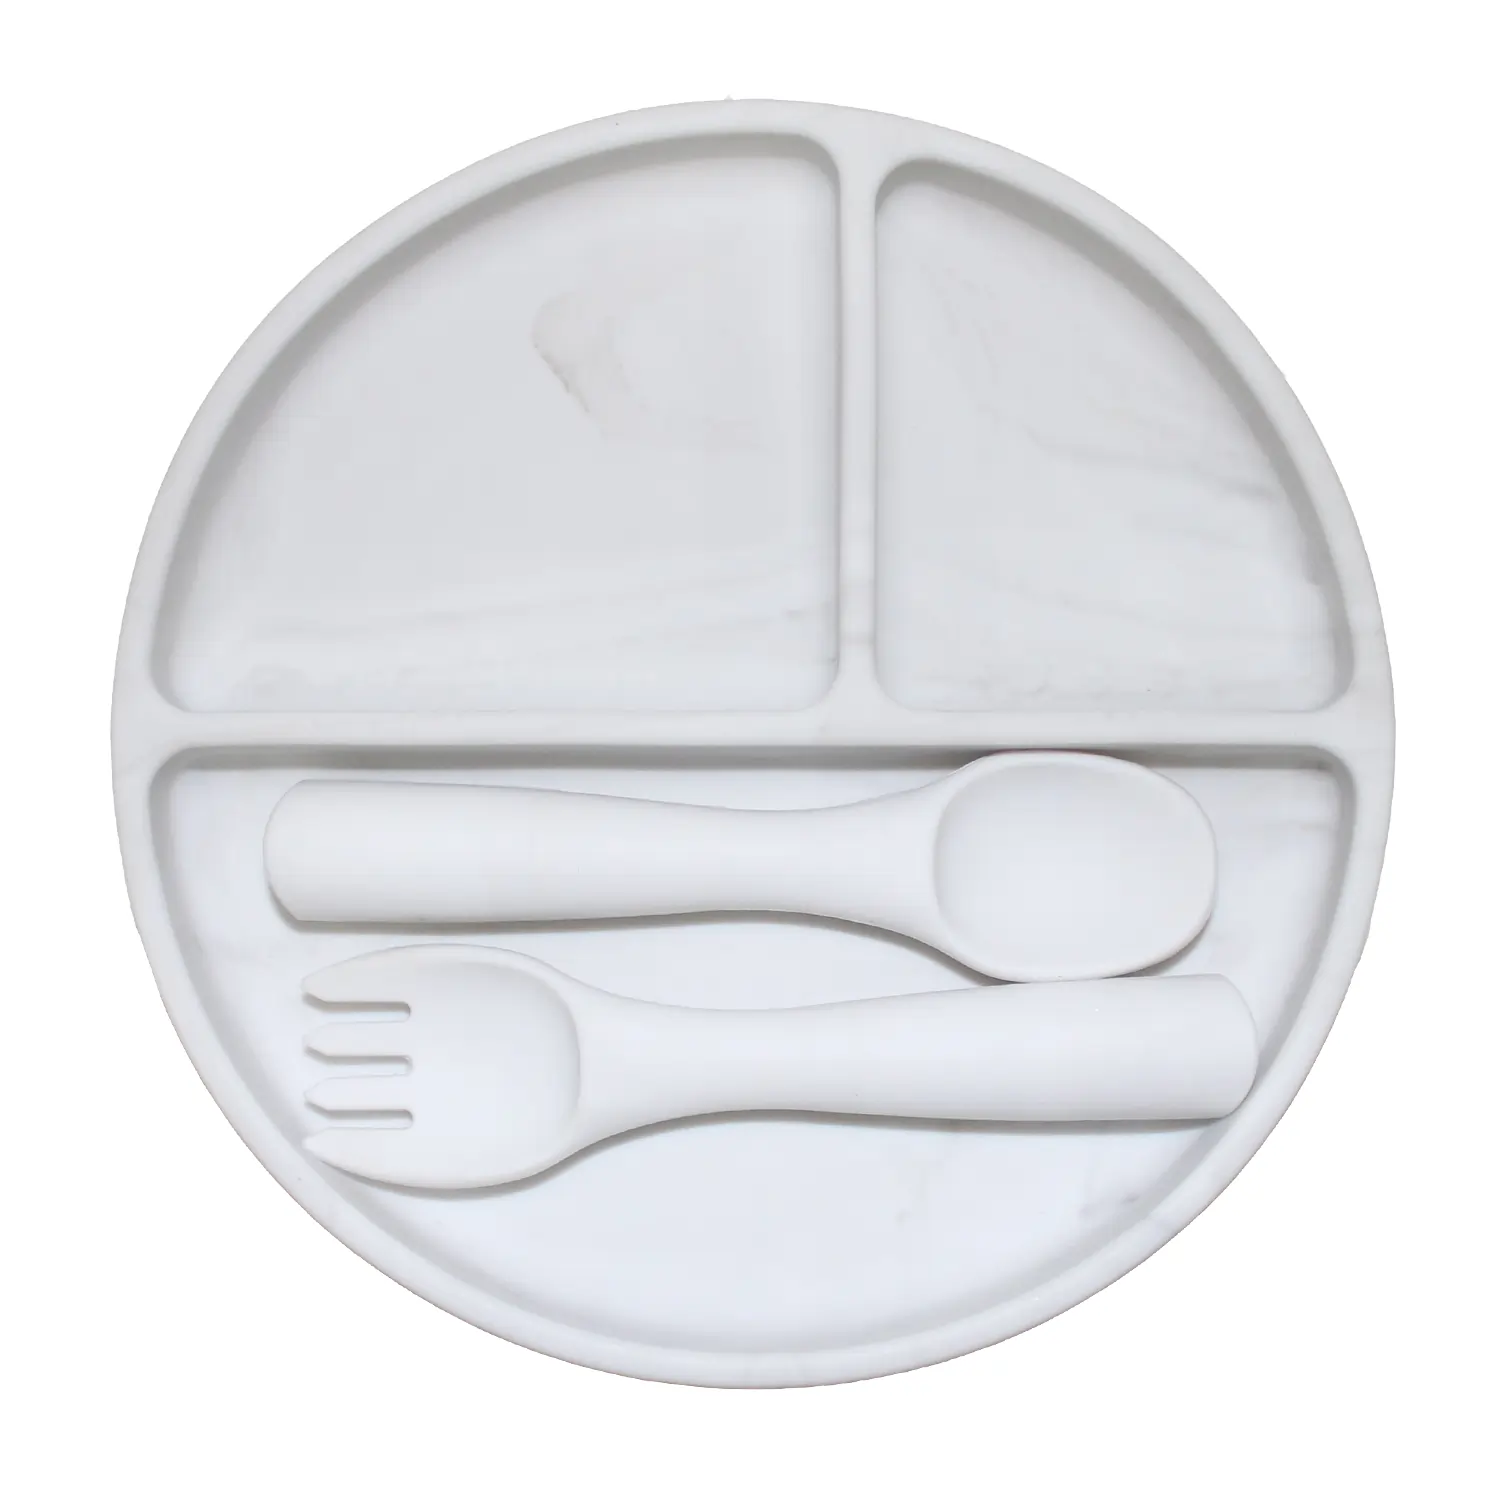 Marble White Silicone Round Plate Set